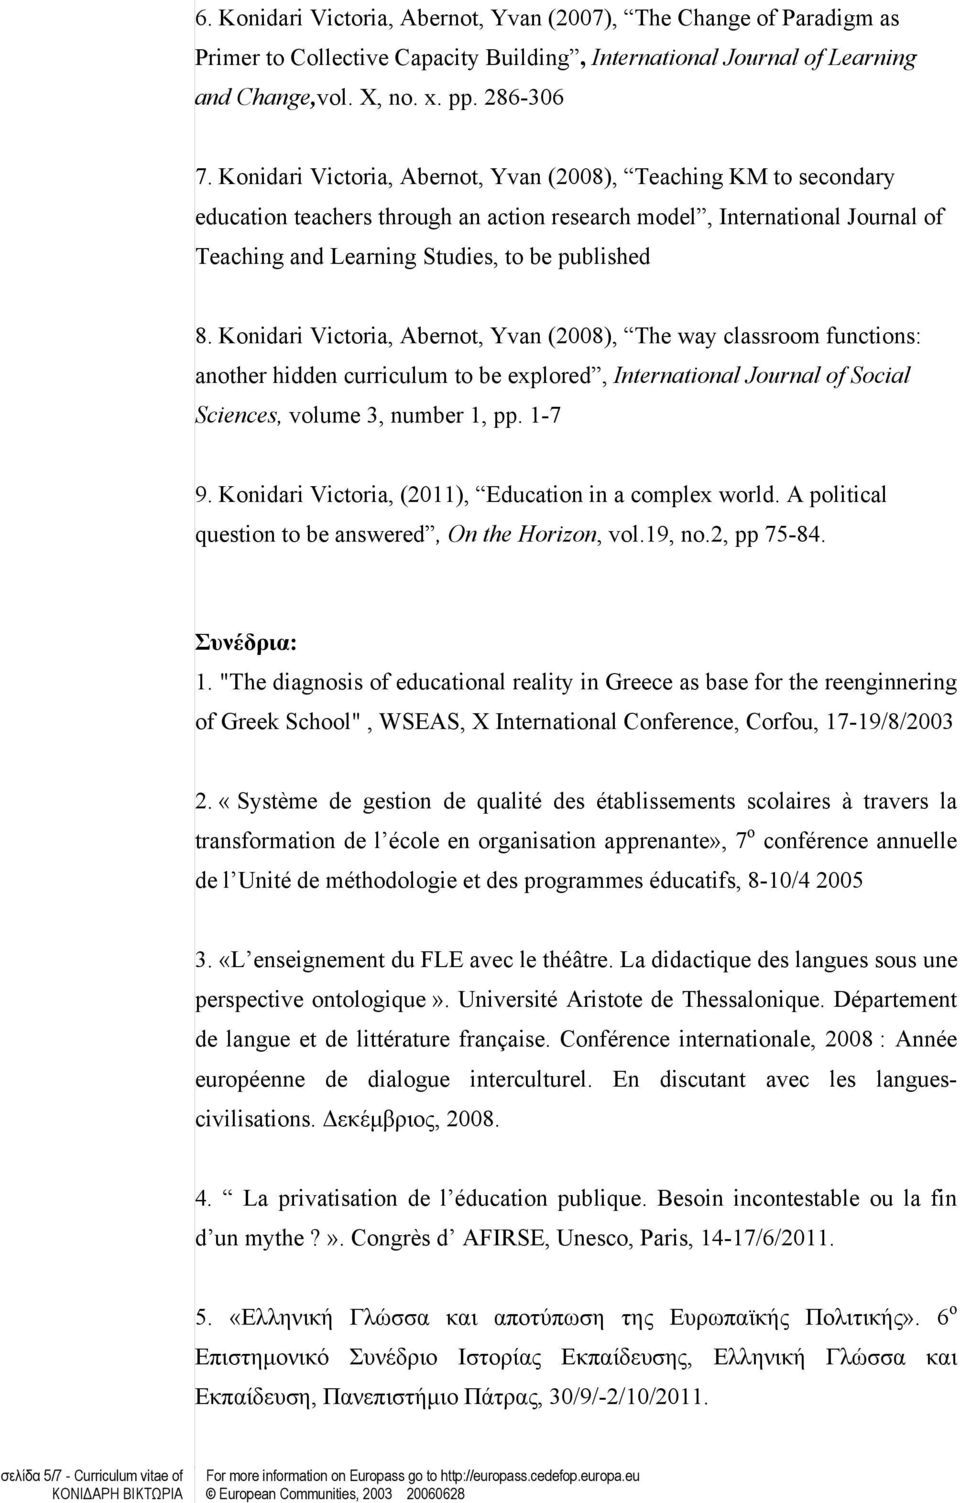 Konidari Victoria, Abernot, Yvan (008), The way classroom functions: another hidden curriculum to be explored, International Journal of Social Sciences, volume 3, number, pp. -7 9.